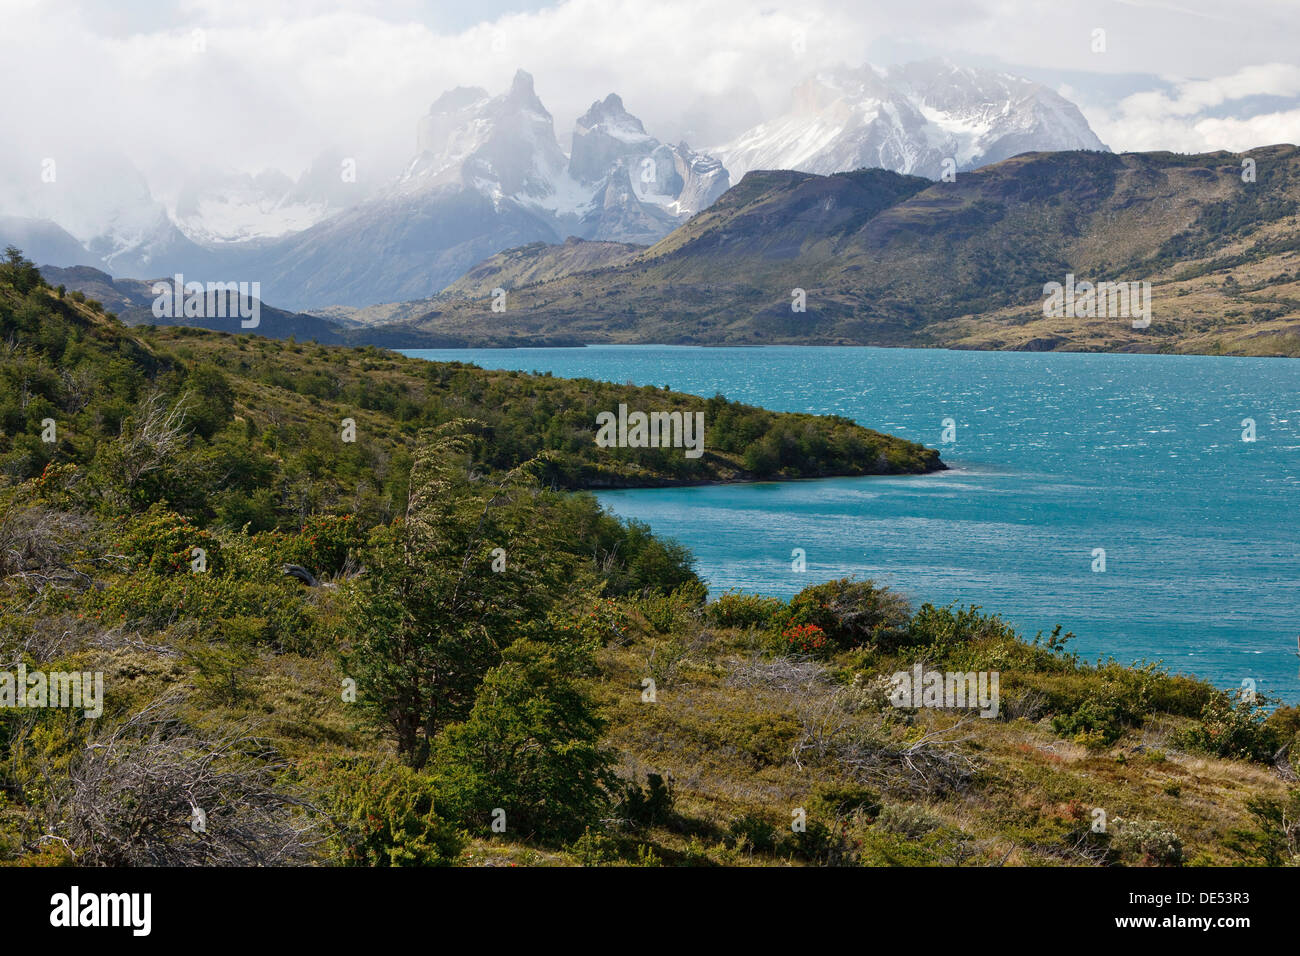 View of the granite mountain Cuernos del Paine in the Torres del Paine National Park on the shore of the glacial lake Lago del Stock Photo